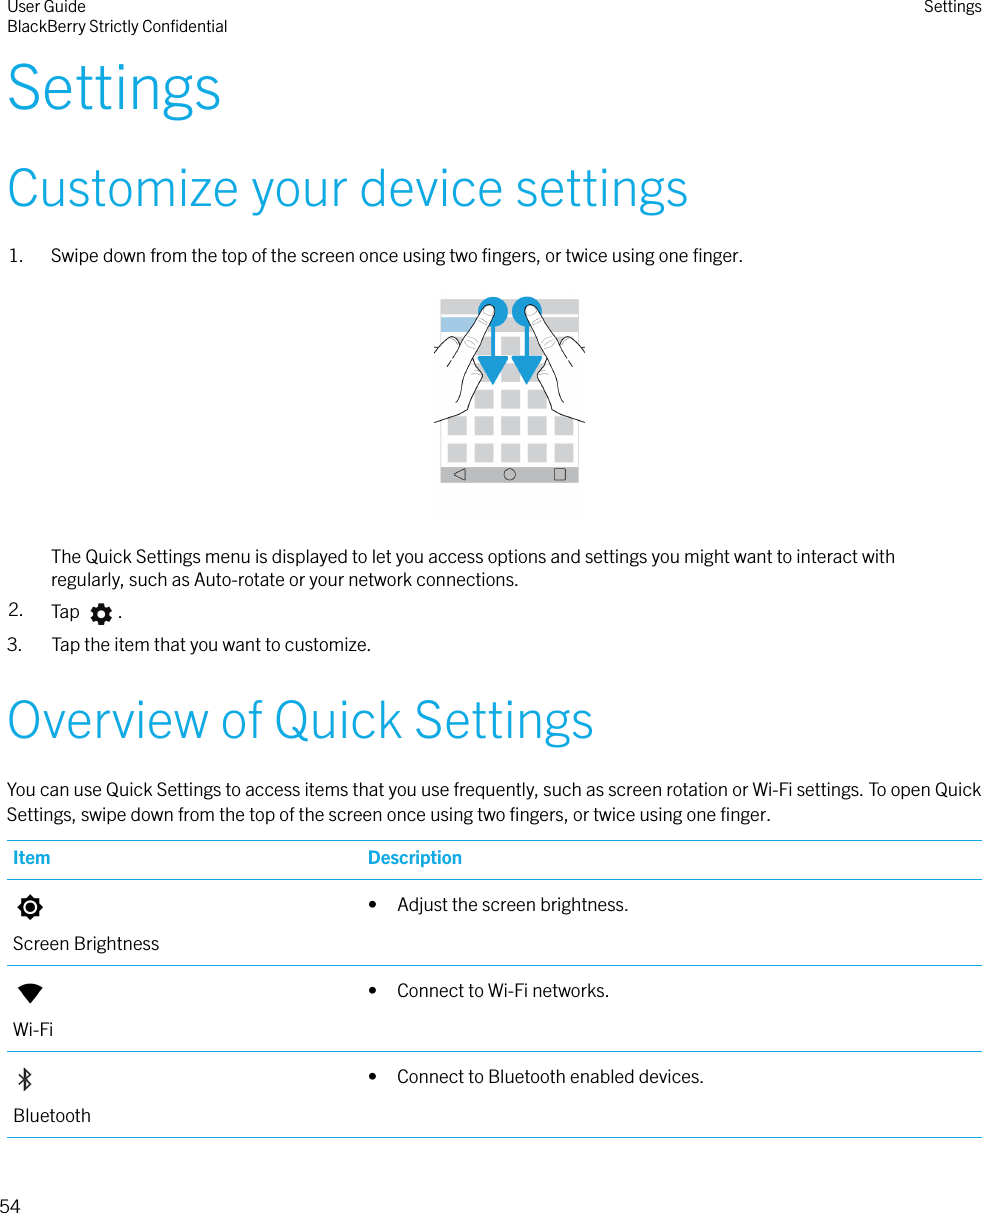 SettingsCustomize your device settings1. Swipe down from the top of the screen once using two ﬁngers, or twice using one ﬁnger.  The Quick Settings menu is displayed to let you access options and settings you might want to interact withregularly, such as Auto-rotate or your network connections.2. Tap  .3. Tap the item that you want to customize.Overview of Quick SettingsYou can use Quick Settings to access items that you use frequently, such as screen rotation or Wi-Fi settings. To open QuickSettings, swipe down from the top of the screen once using two ﬁngers, or twice using one ﬁnger.Item DescriptionScreen Brightness• Adjust the screen brightness.Wi-Fi• Connect to Wi-Fi networks.Bluetooth• Connect to Bluetooth enabled devices.User GuideBlackBerry Strictly ConﬁdentialSettings54